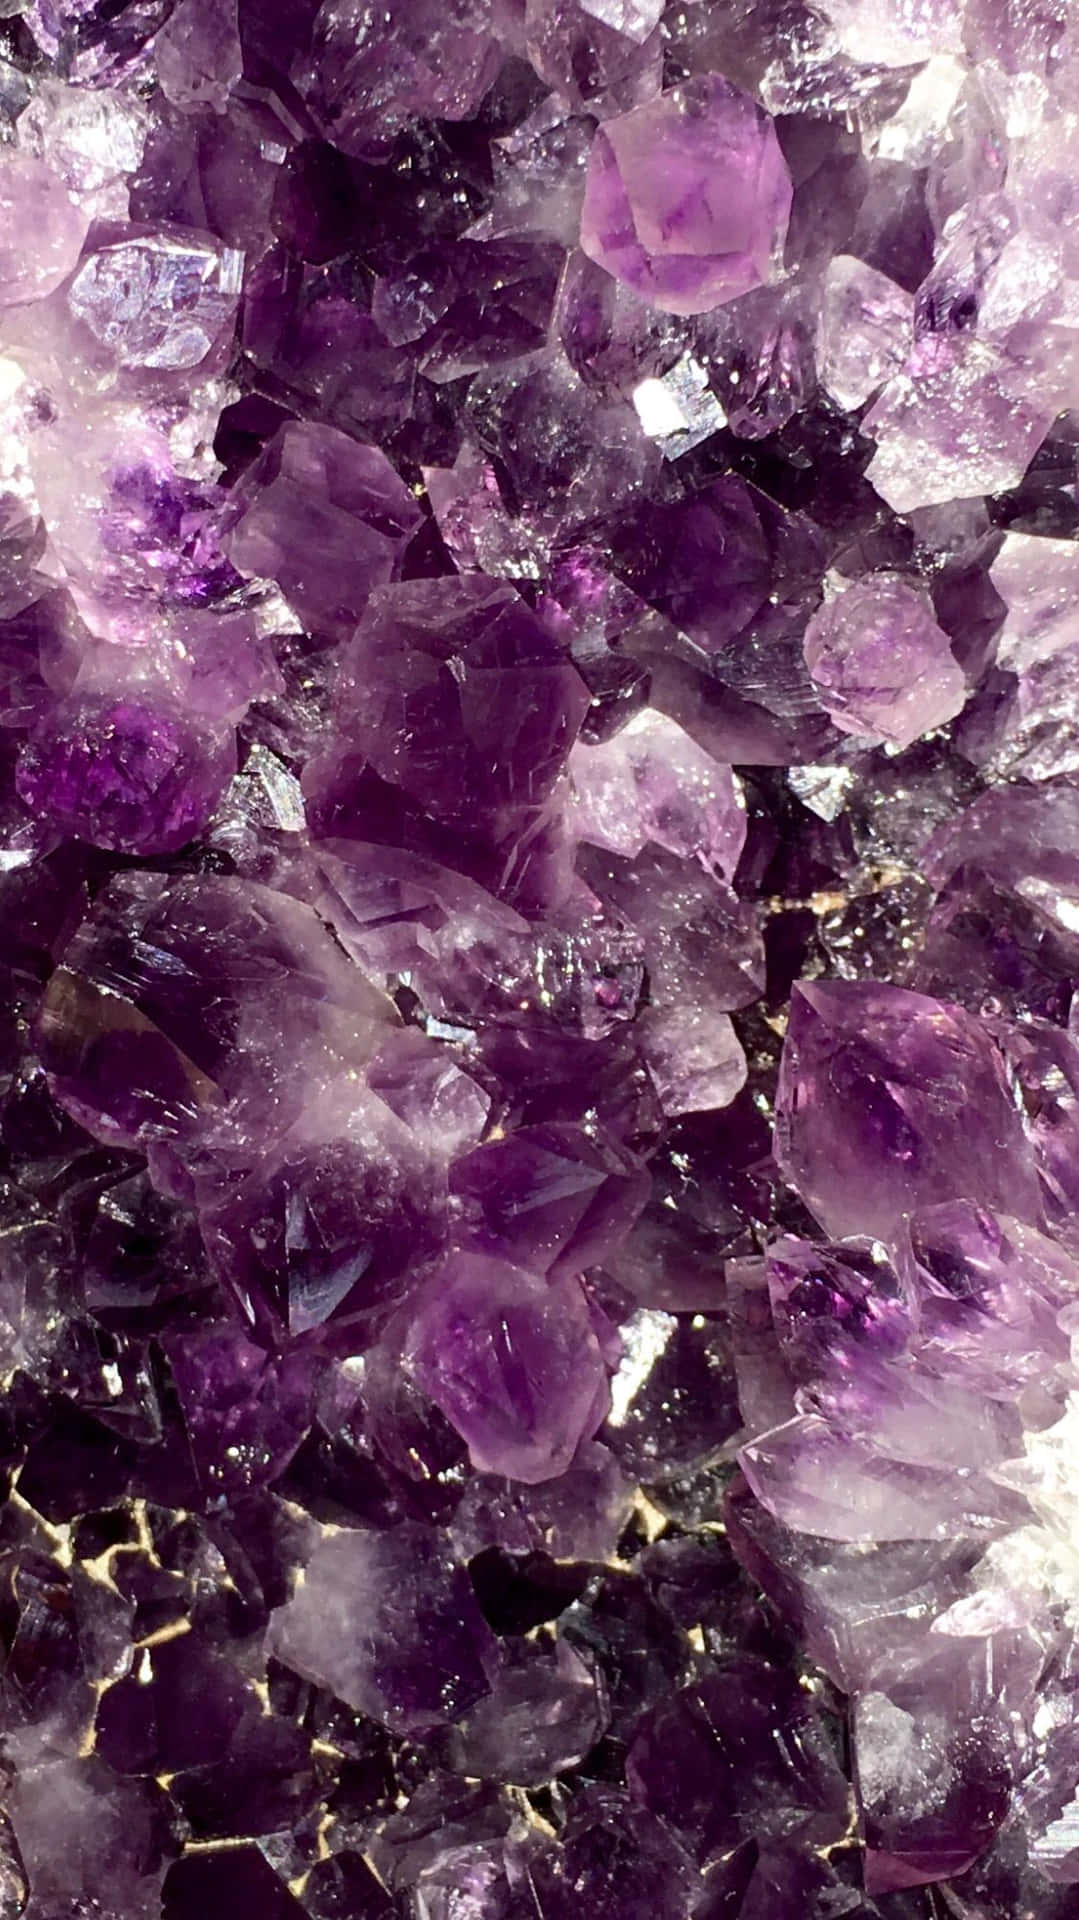 Discover the healing power of Crystals" Wallpaper